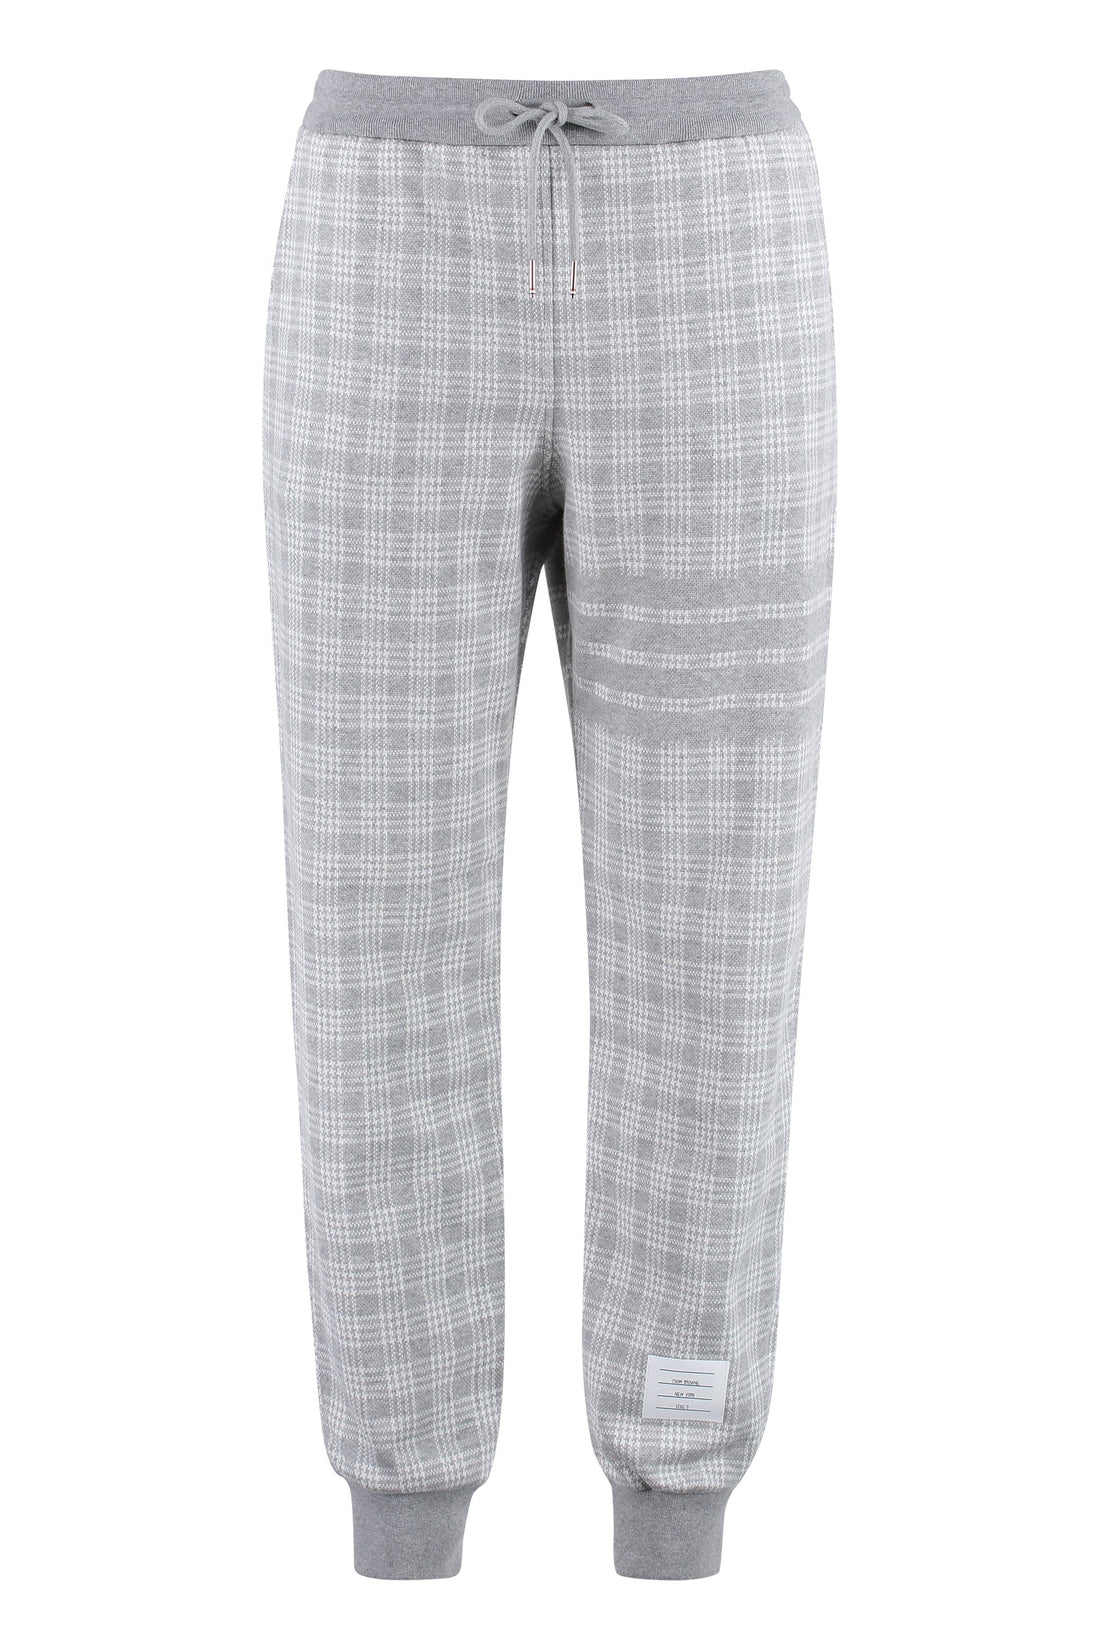 Thom Browne-OUTLET-SALE-Checked cotton track-pants-ARCHIVIST